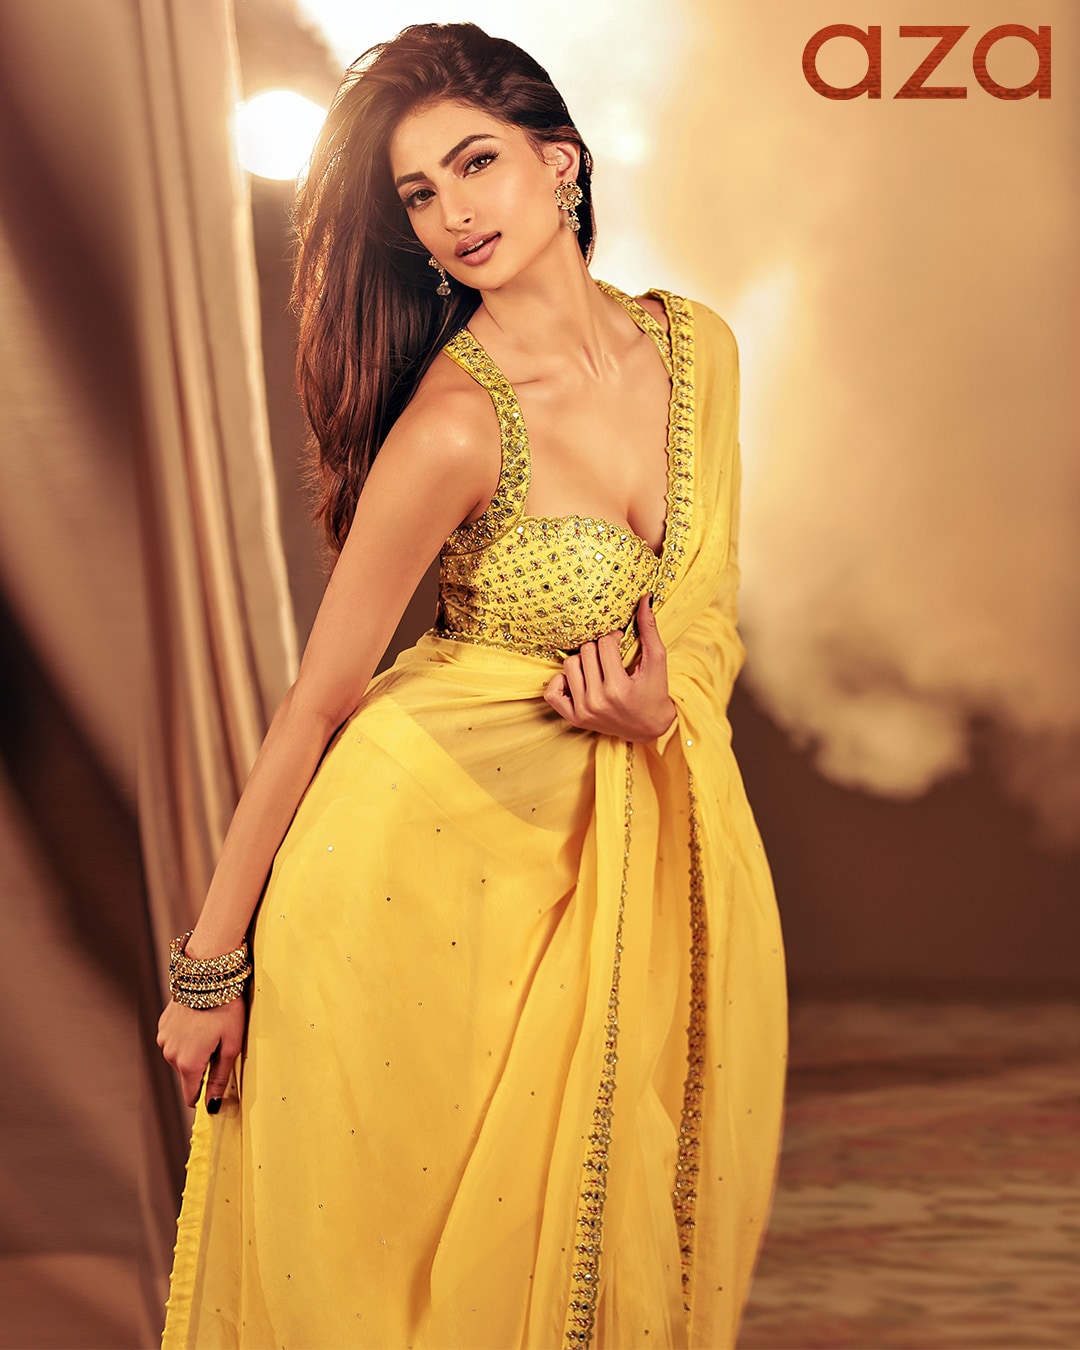 Palak_Tiwari_in_Yellow_pre-draped_saree_with_embroidery_on_the_border_and_tassels_at_the_end_Comes_with_embroidered_halter_neck_blouse